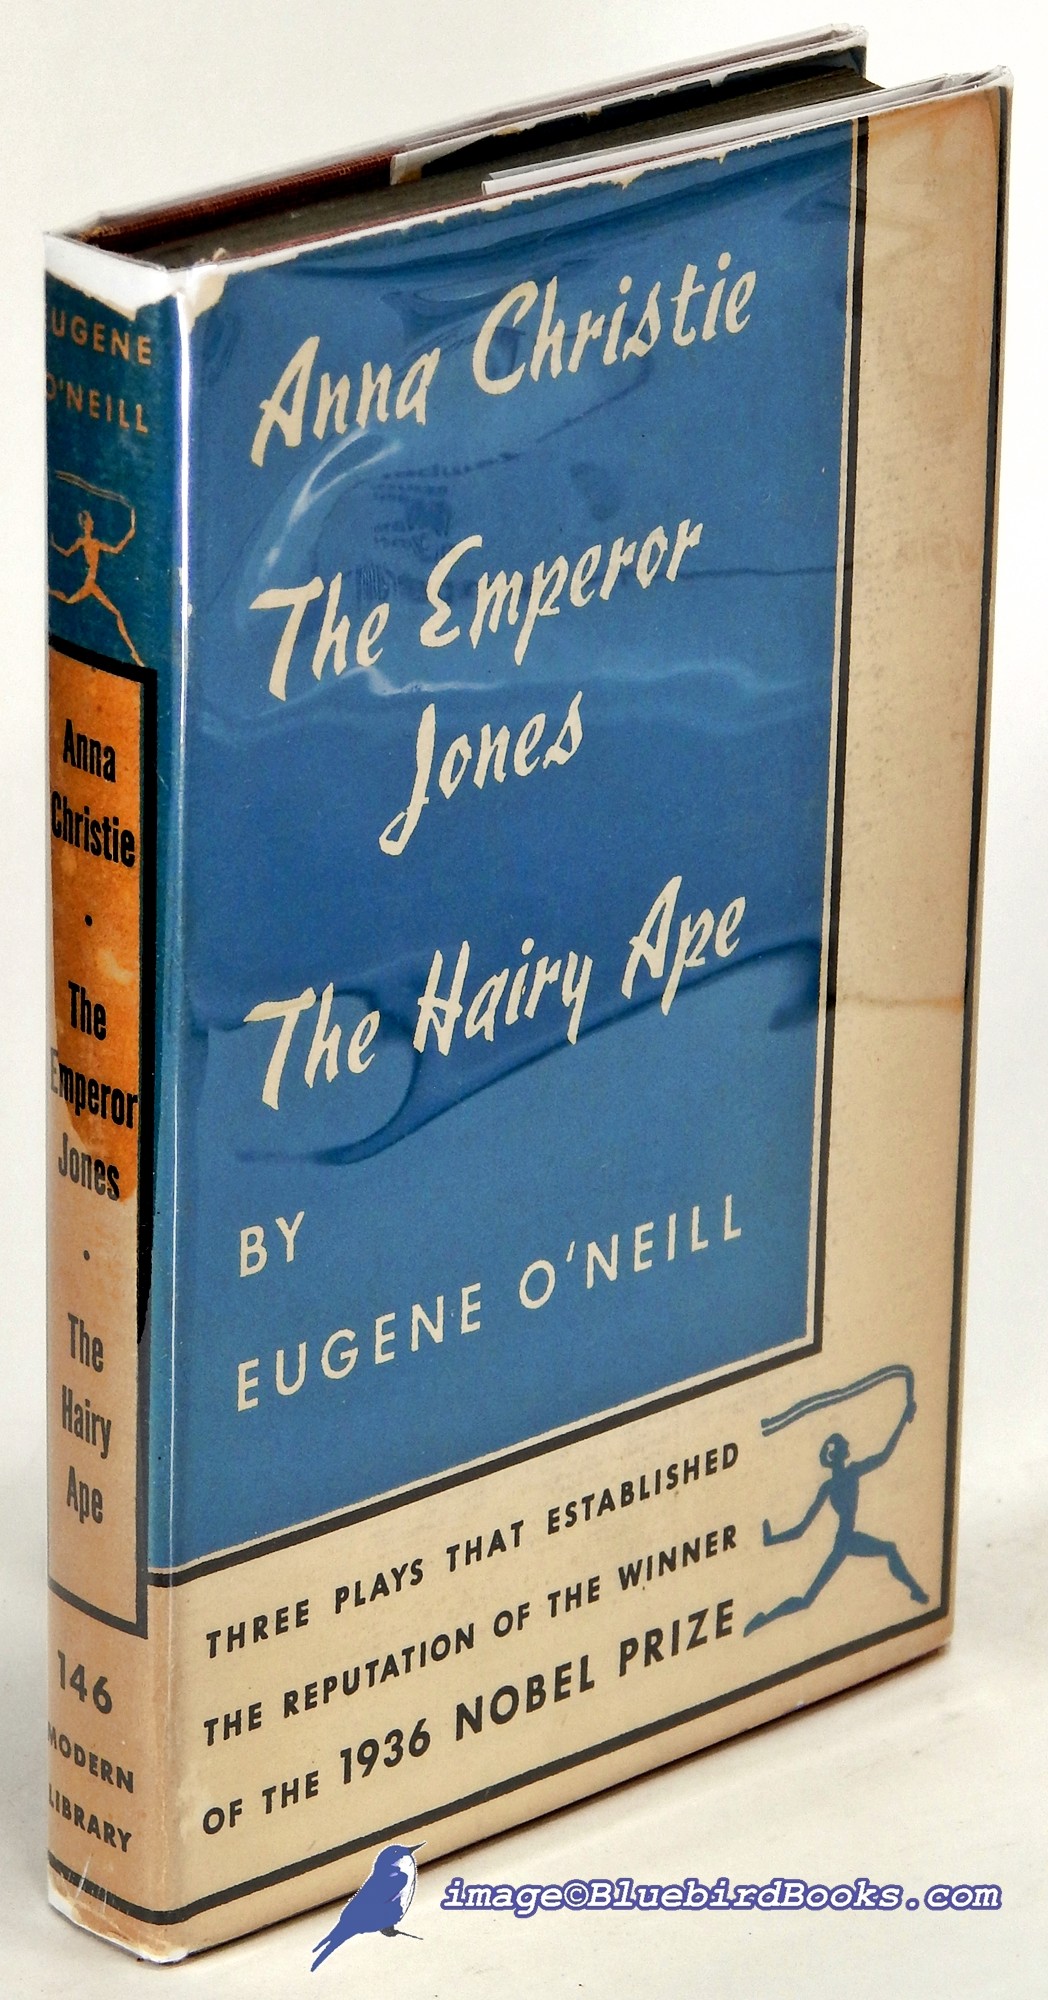 O'NEILL, EUGENE - Three Plays: Anna Christie, the Emperor Jones, and the Hairy Ape (Modern Library #146. 2)